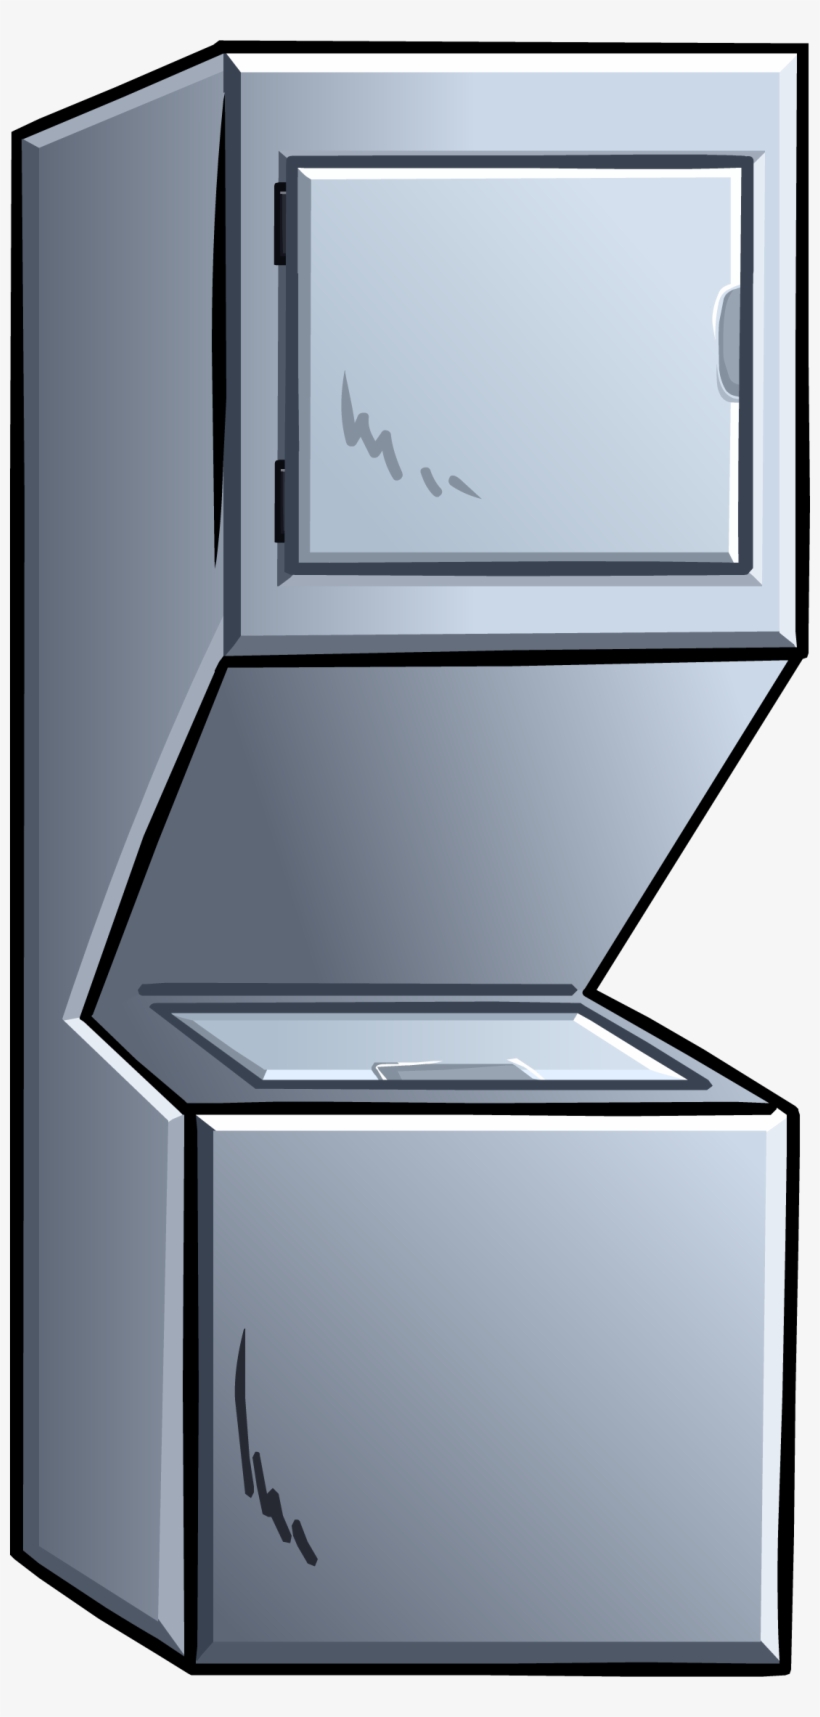 Stacking Washer And Dryer - Club Penguin Washing Machine, transparent png #4165426